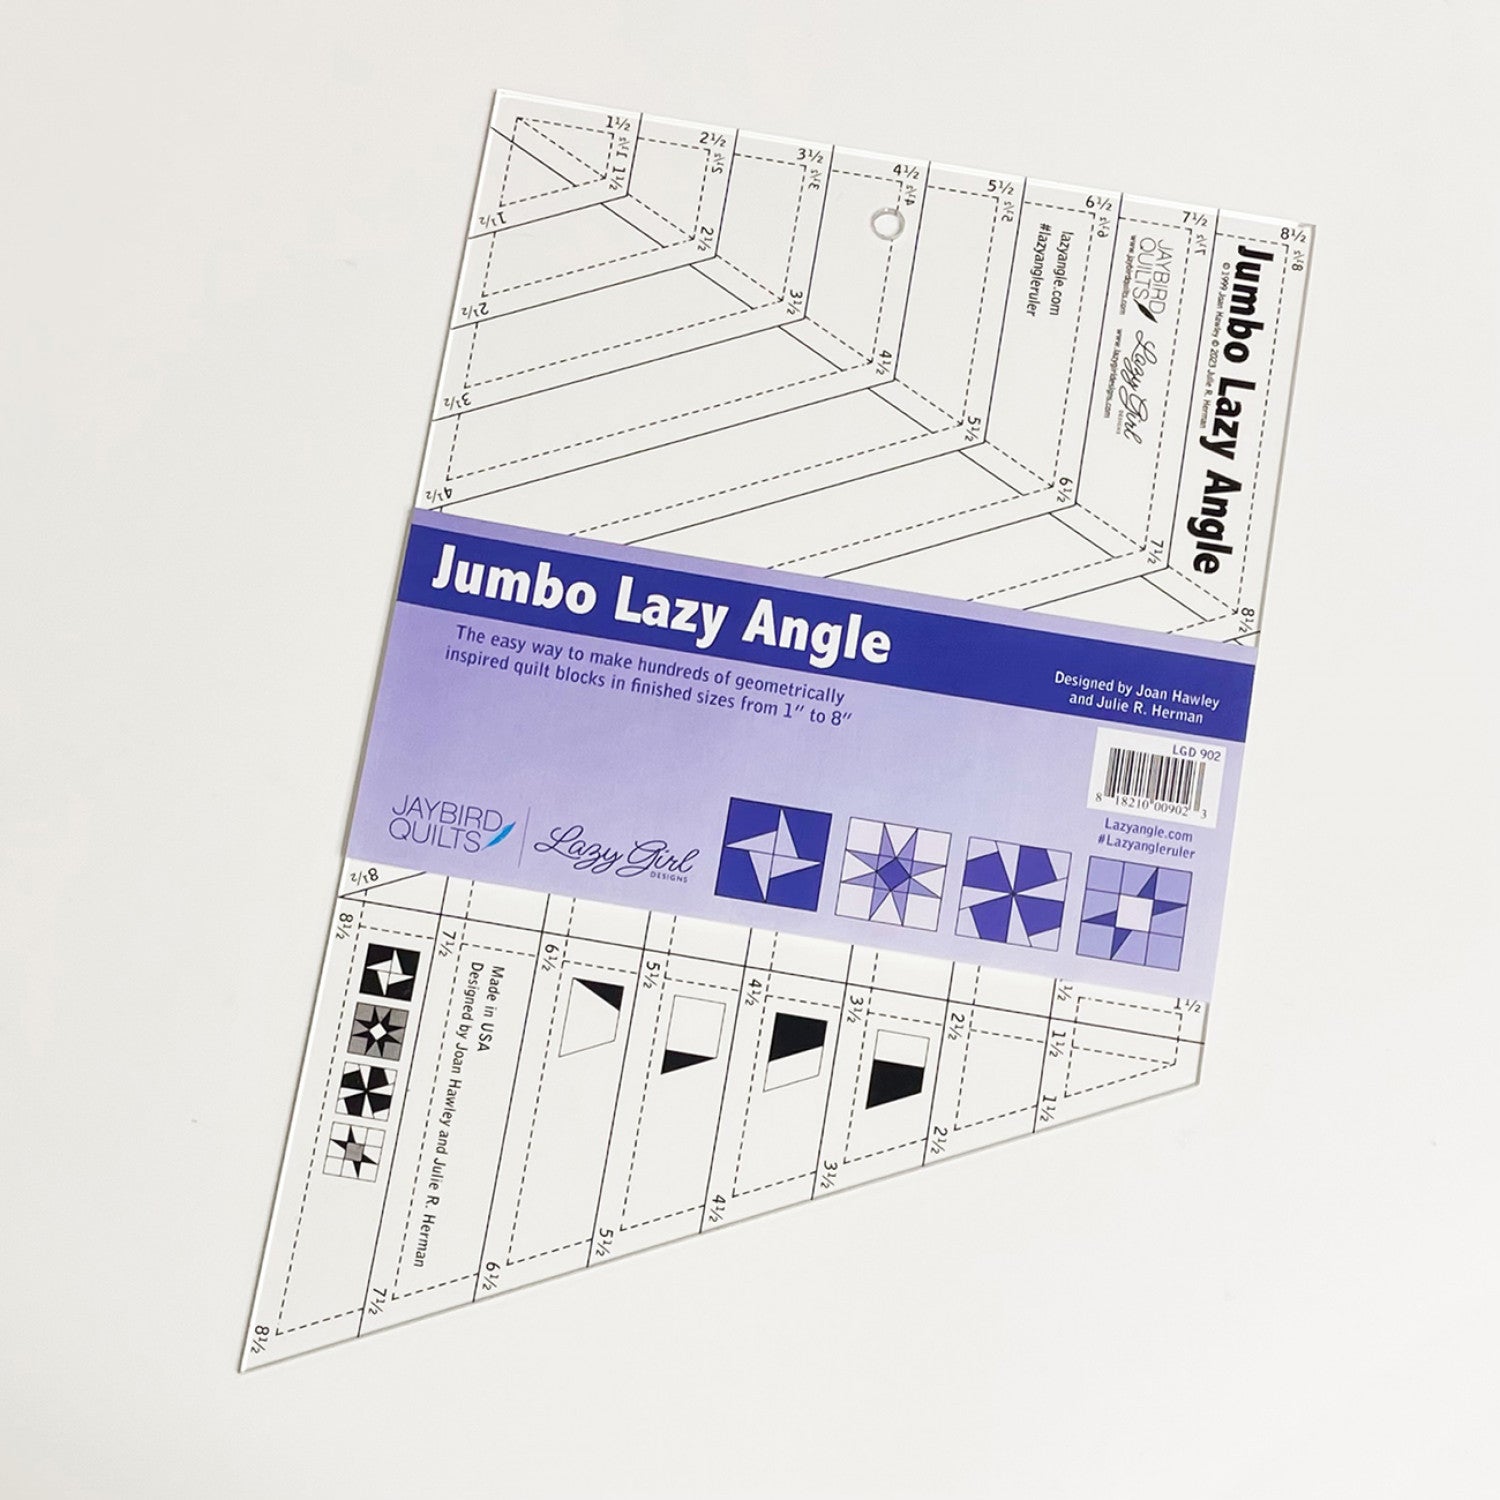 Jumbo Lazy Angle Quilt Ruler by Joan Hawley and Julie Herman of Lazy Girl Designs